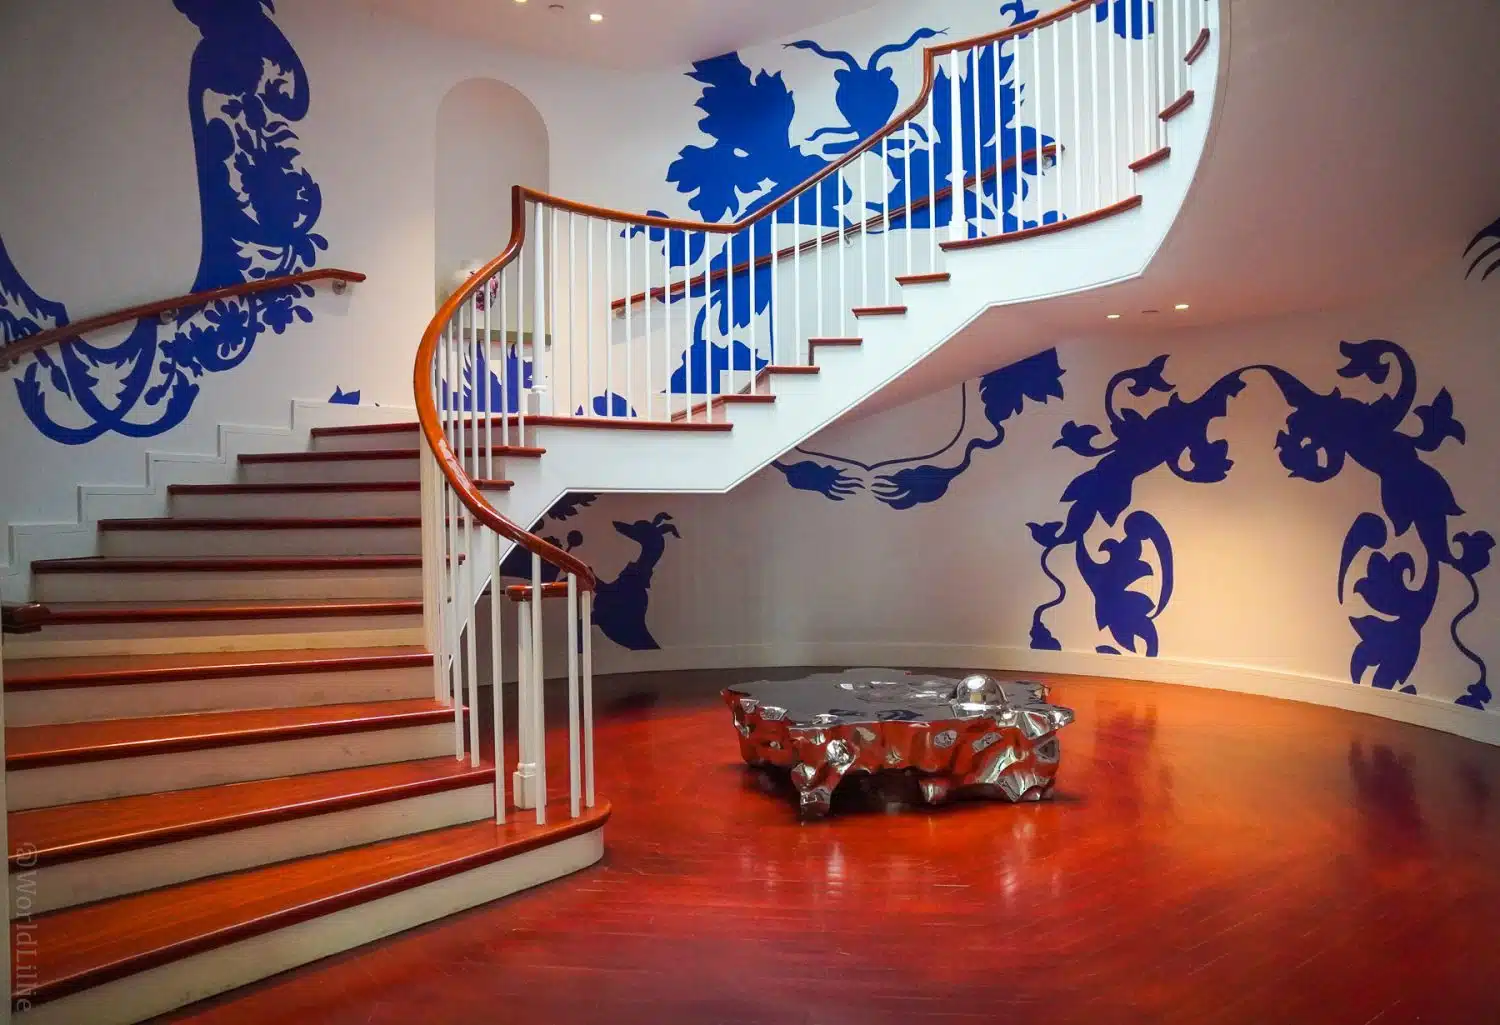 An ornate staircase at the Peabody Essex Museum.